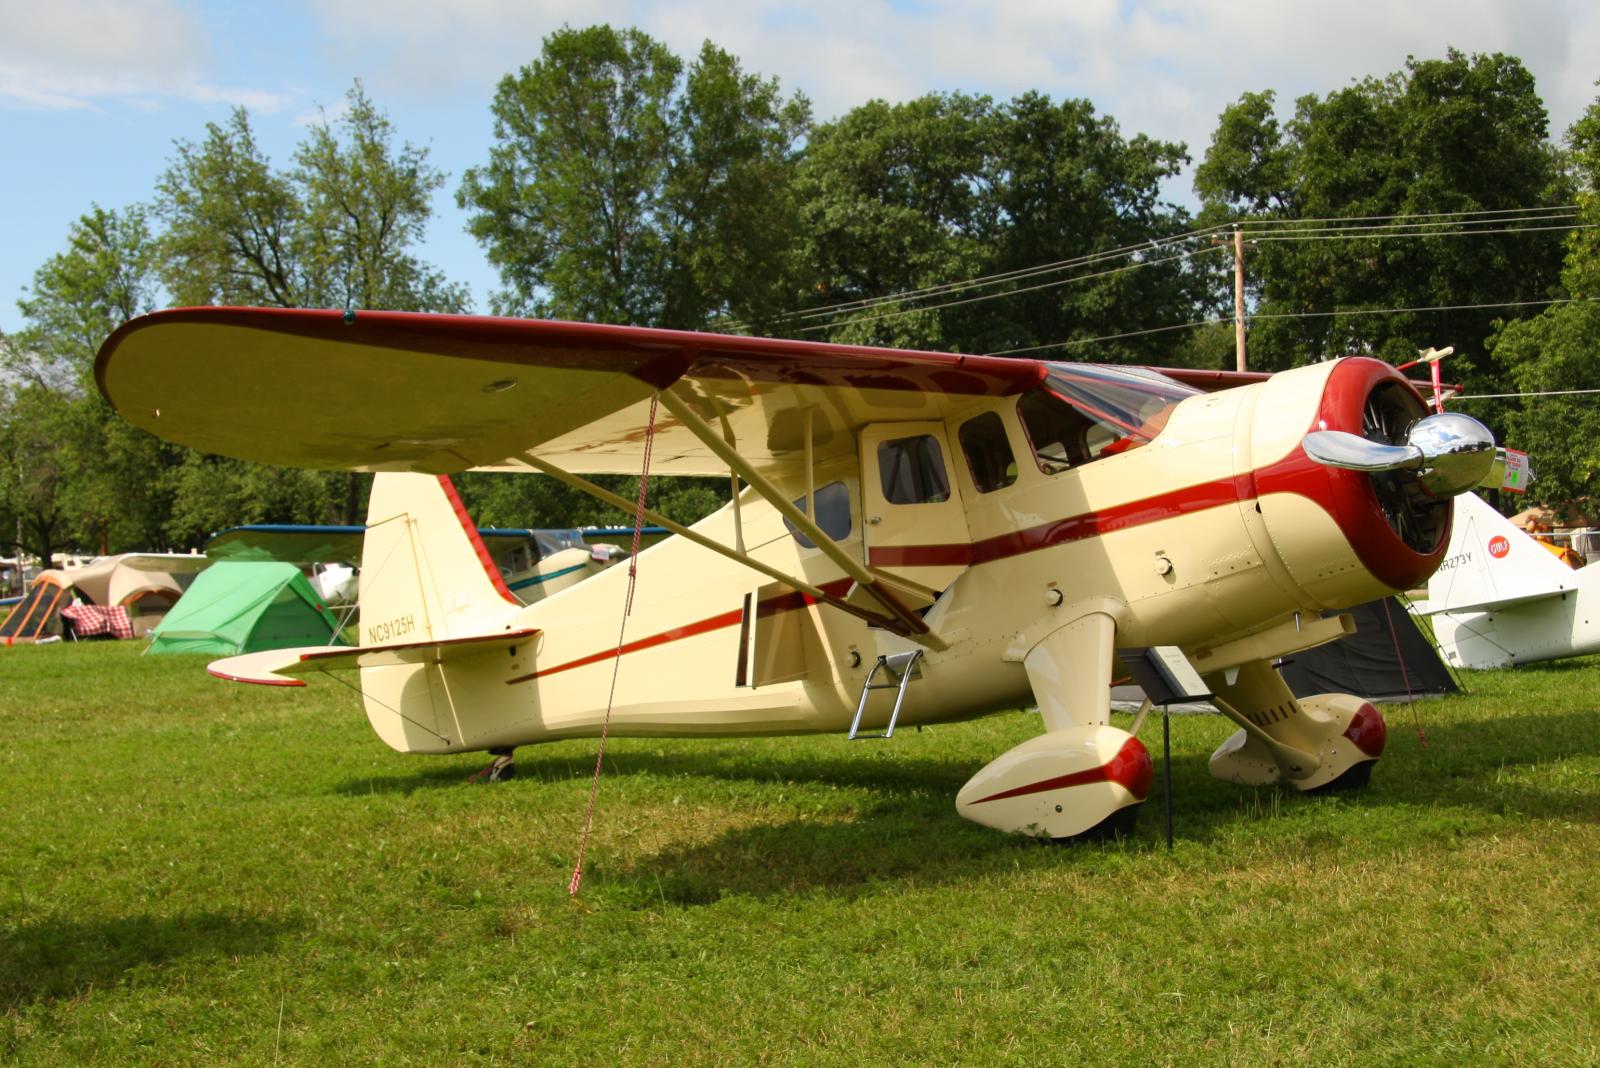 an old style airplane sits in the middle of some grass